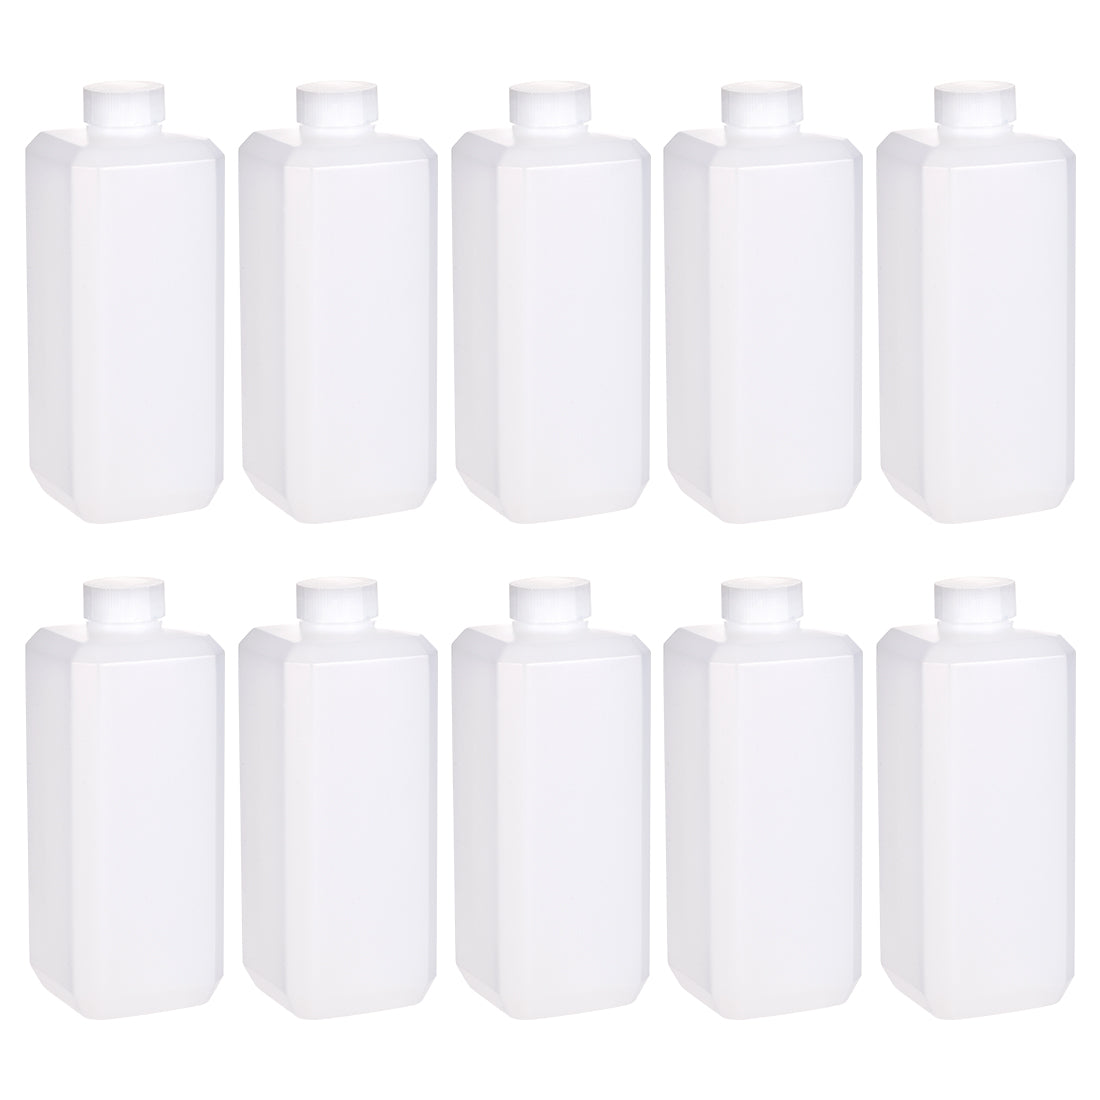 uxcell Uxcell Plastic Lab Chemical Reagent Bottle, 500ml/16.9 oz Wide Mouth Sample Sealing Liquid/Solid Storage Bottles, White 10pcs